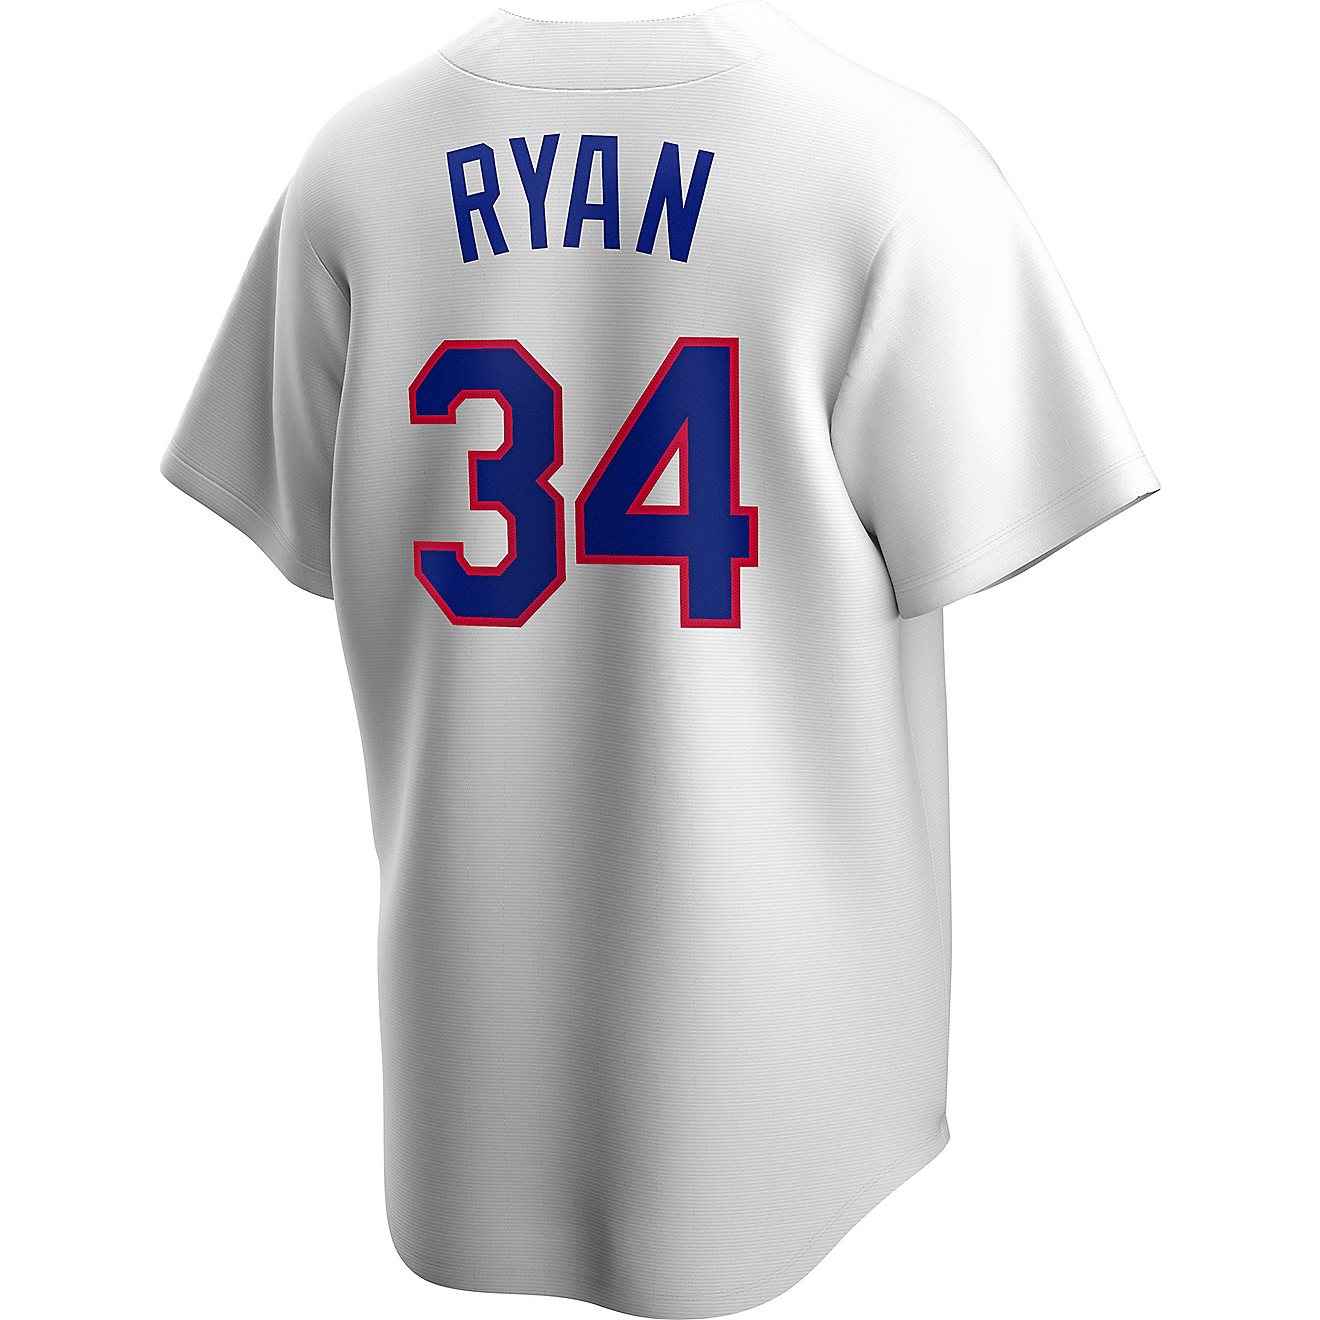 Nike Men's Texas Rangers Official Player Cooperstown Jersey                                                                      - view number 1